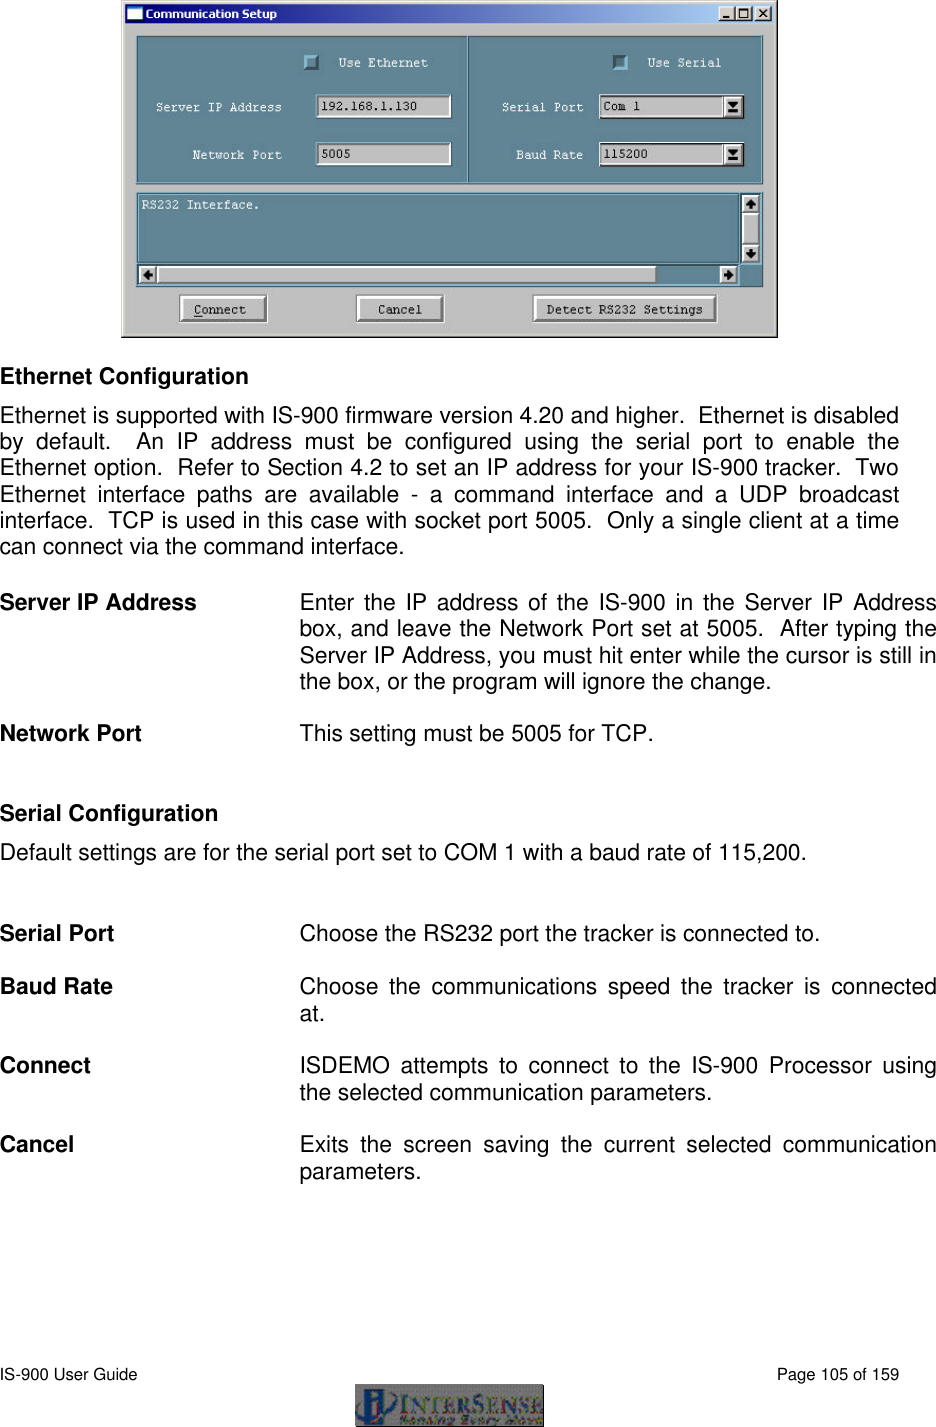  IS-900 User Guide                                                                                                                                          Page 105 of 159   Ethernet Configuration   Ethernet is supported with IS-900 firmware version 4.20 and higher.  Ethernet is disabled by default.  An IP address must be configured using the serial port to enable the Ethernet option.  Refer to Section 4.2 to set an IP address for your IS-900 tracker.  Two Ethernet interface paths are available - a command interface and a UDP broadcast interface.  TCP is used in this case with socket port 5005.  Only a single client at a time can connect via the command interface. Server IP Address Enter the IP address of the IS-900 in the Server IP Address box, and leave the Network Port set at 5005.  After typing the Server IP Address, you must hit enter while the cursor is still in the box, or the program will ignore the change.  Network Port This setting must be 5005 for TCP.    Serial Configuration Default settings are for the serial port set to COM 1 with a baud rate of 115,200.   Serial Port Choose the RS232 port the tracker is connected to.  Baud Rate Choose the communications speed the tracker is connected at.  Connect ISDEMO attempts to connect to the IS-900 Processor using the selected communication parameters.  Cancel Exits the screen saving the current selected communication parameters.  